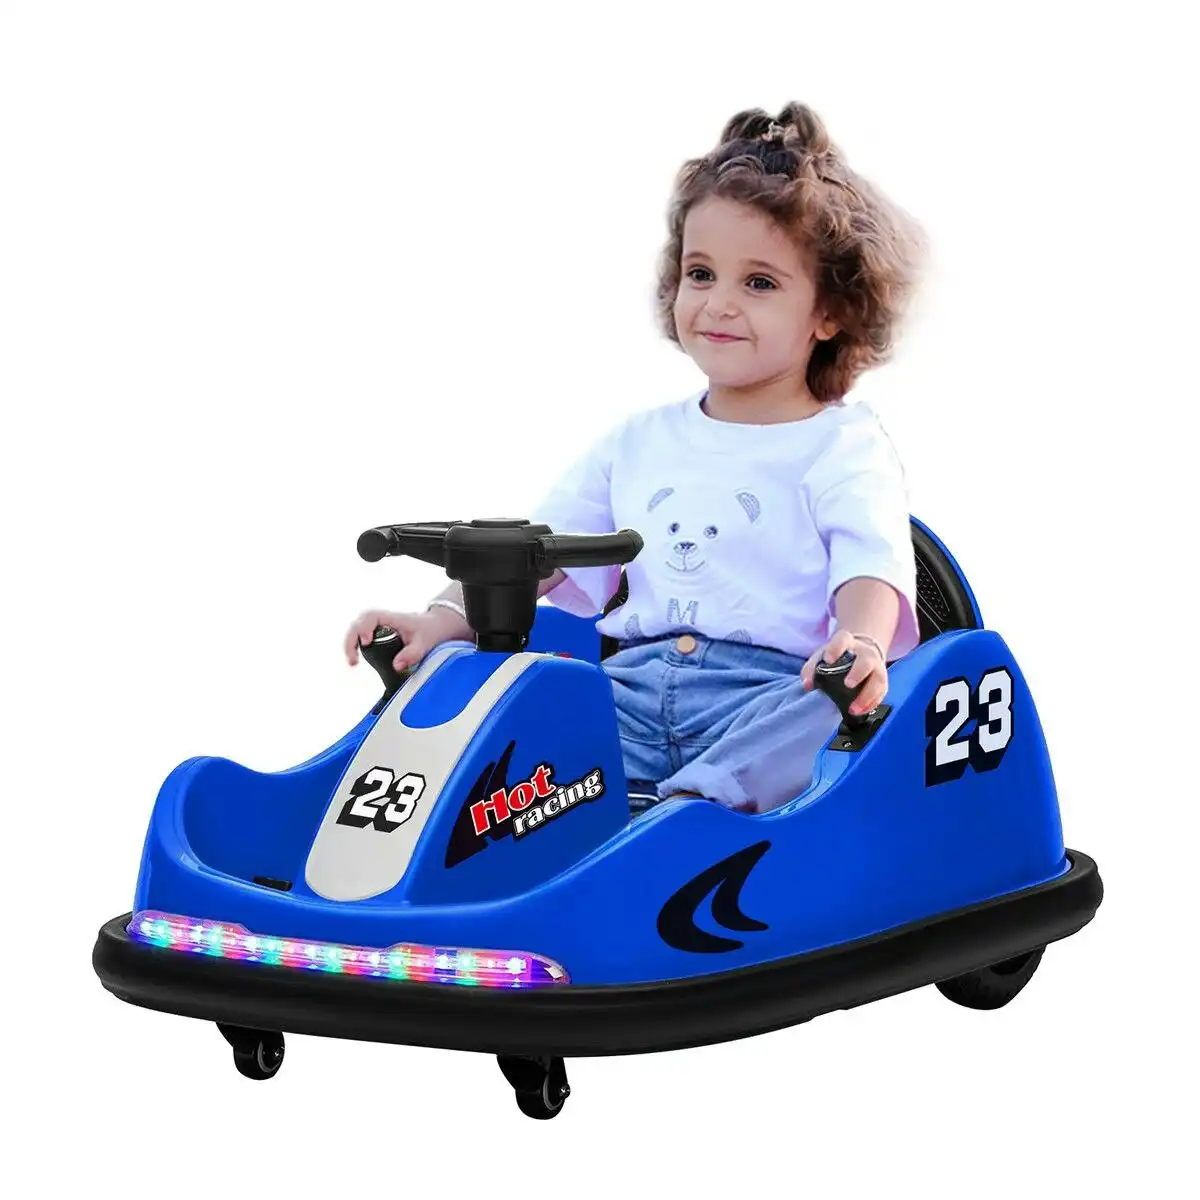 Kidbot Bumper Car With Remote Control Electric Kids Ride On Toy Race Vehicle Music LED DIY Sticker 360 Degree Spin Twin Motor Blue